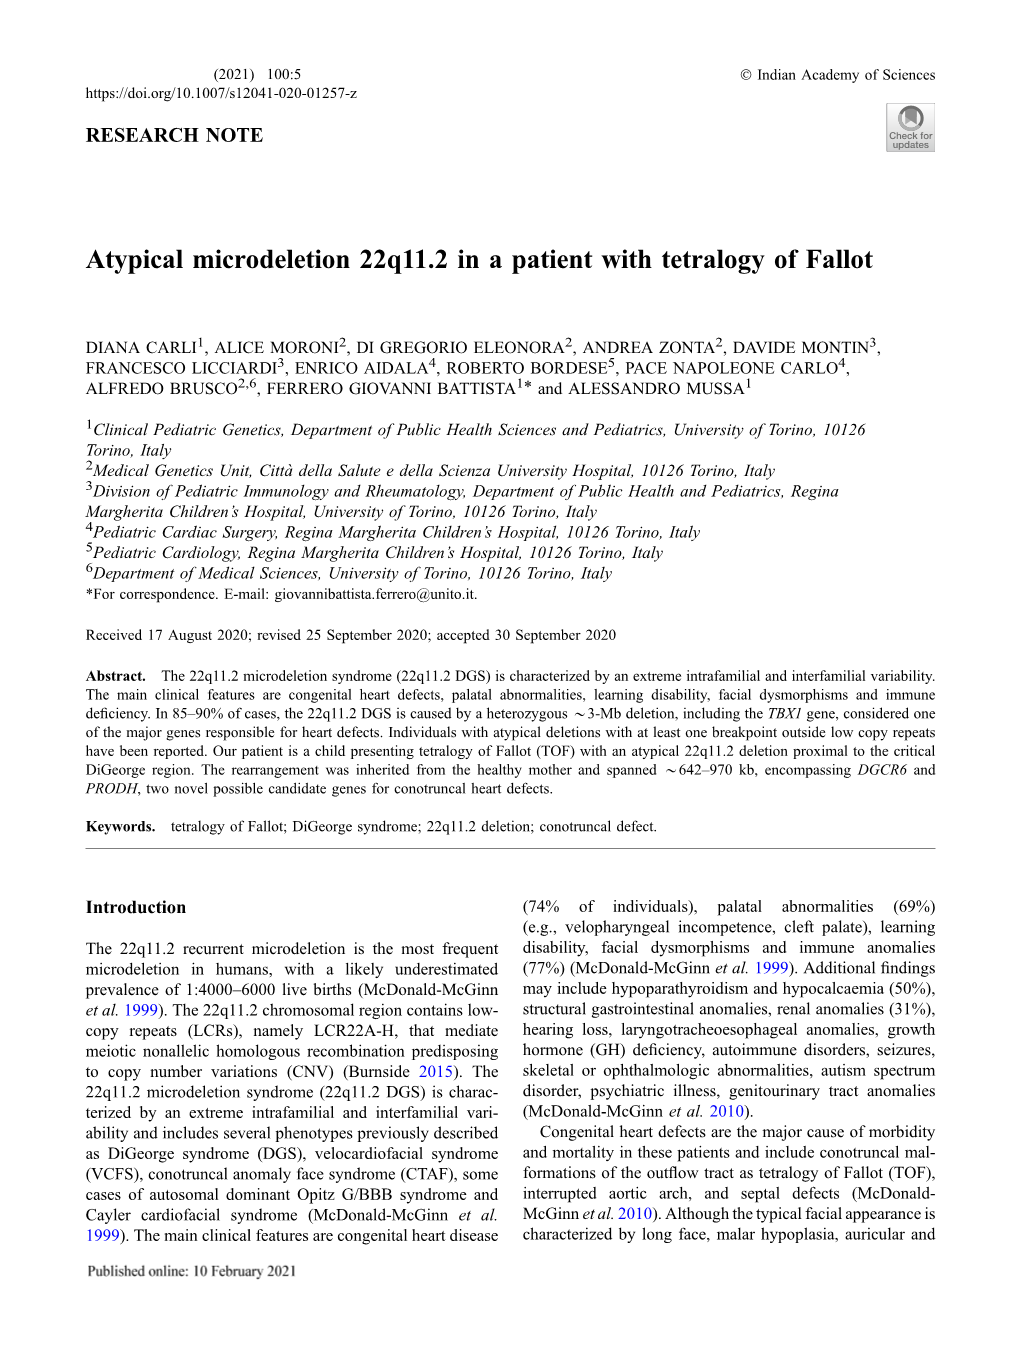 Atypical Microdeletion 22Q11.2 in a Patient with Tetralogy of Fallot